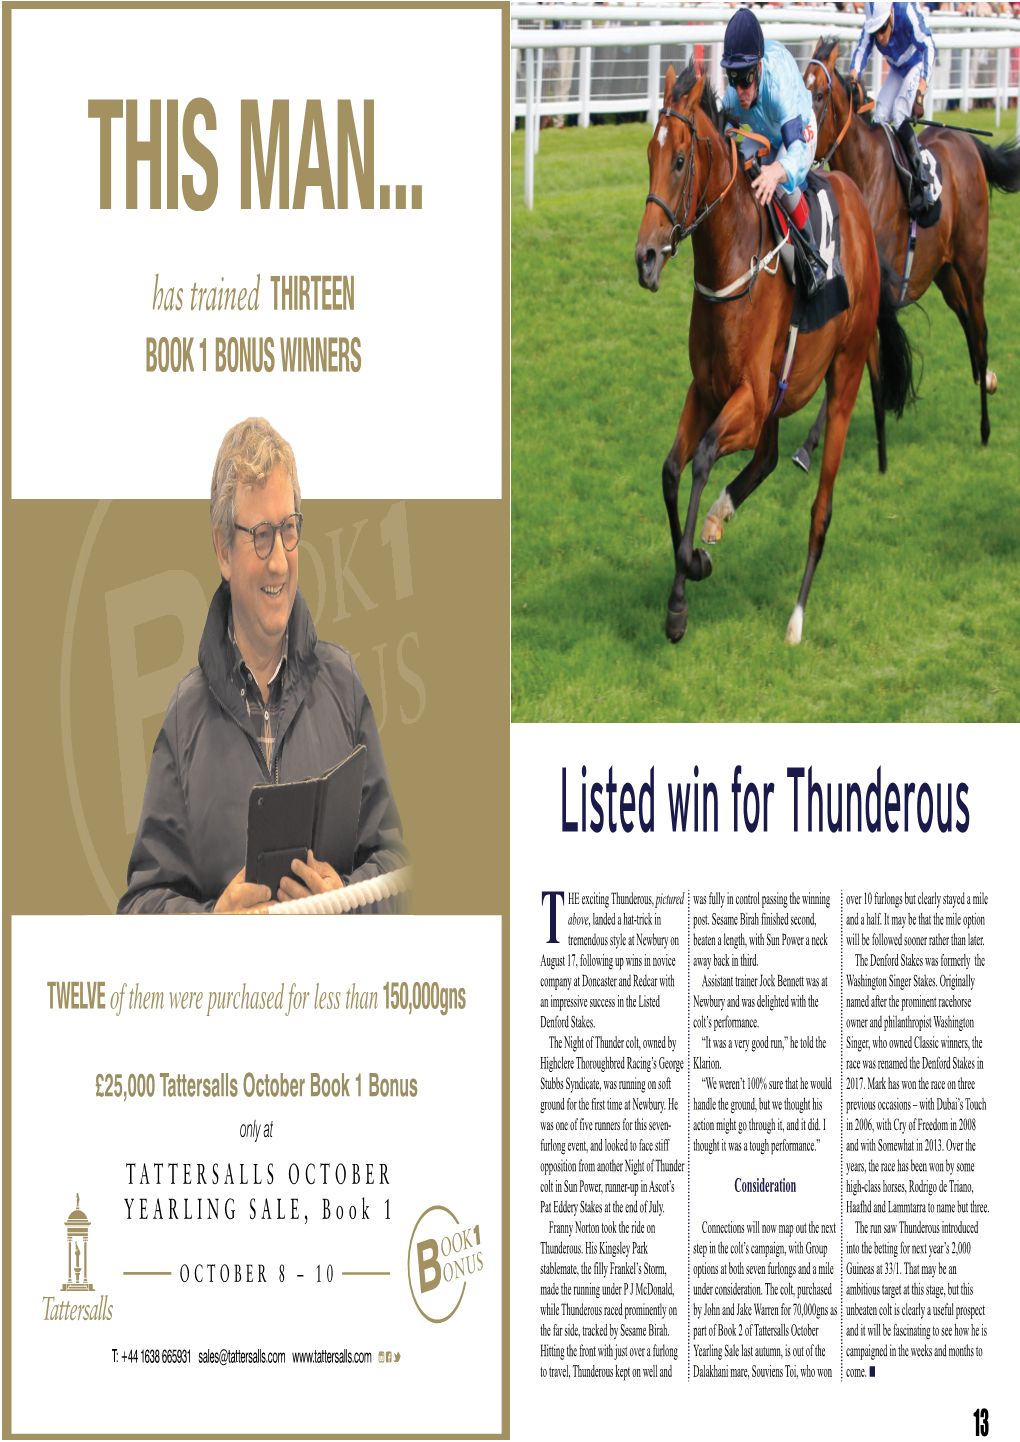 Listed Win for Thunderous